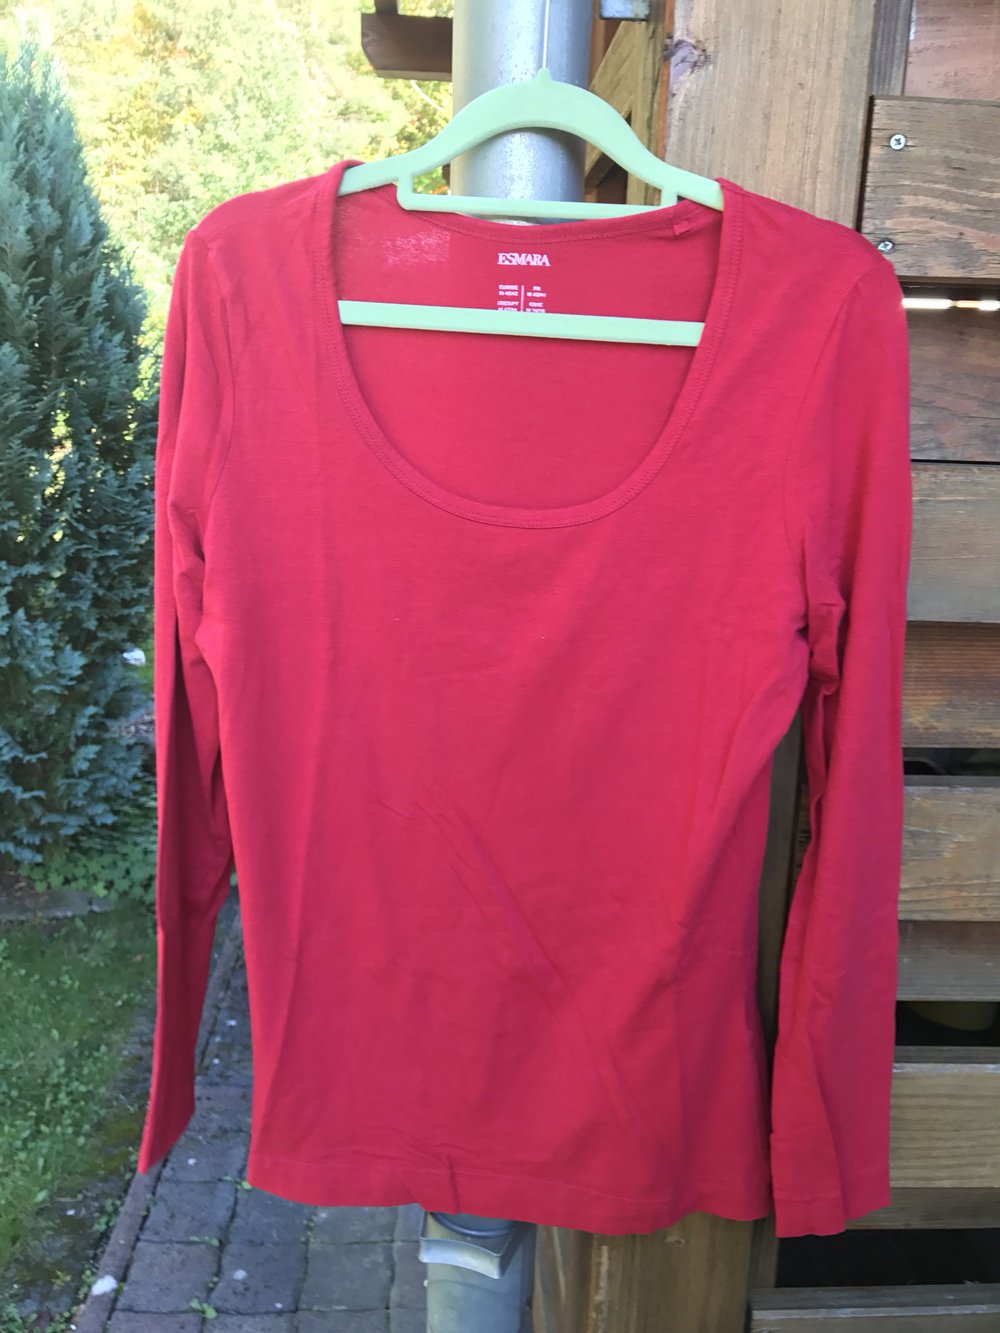 Roter Basic Pullover